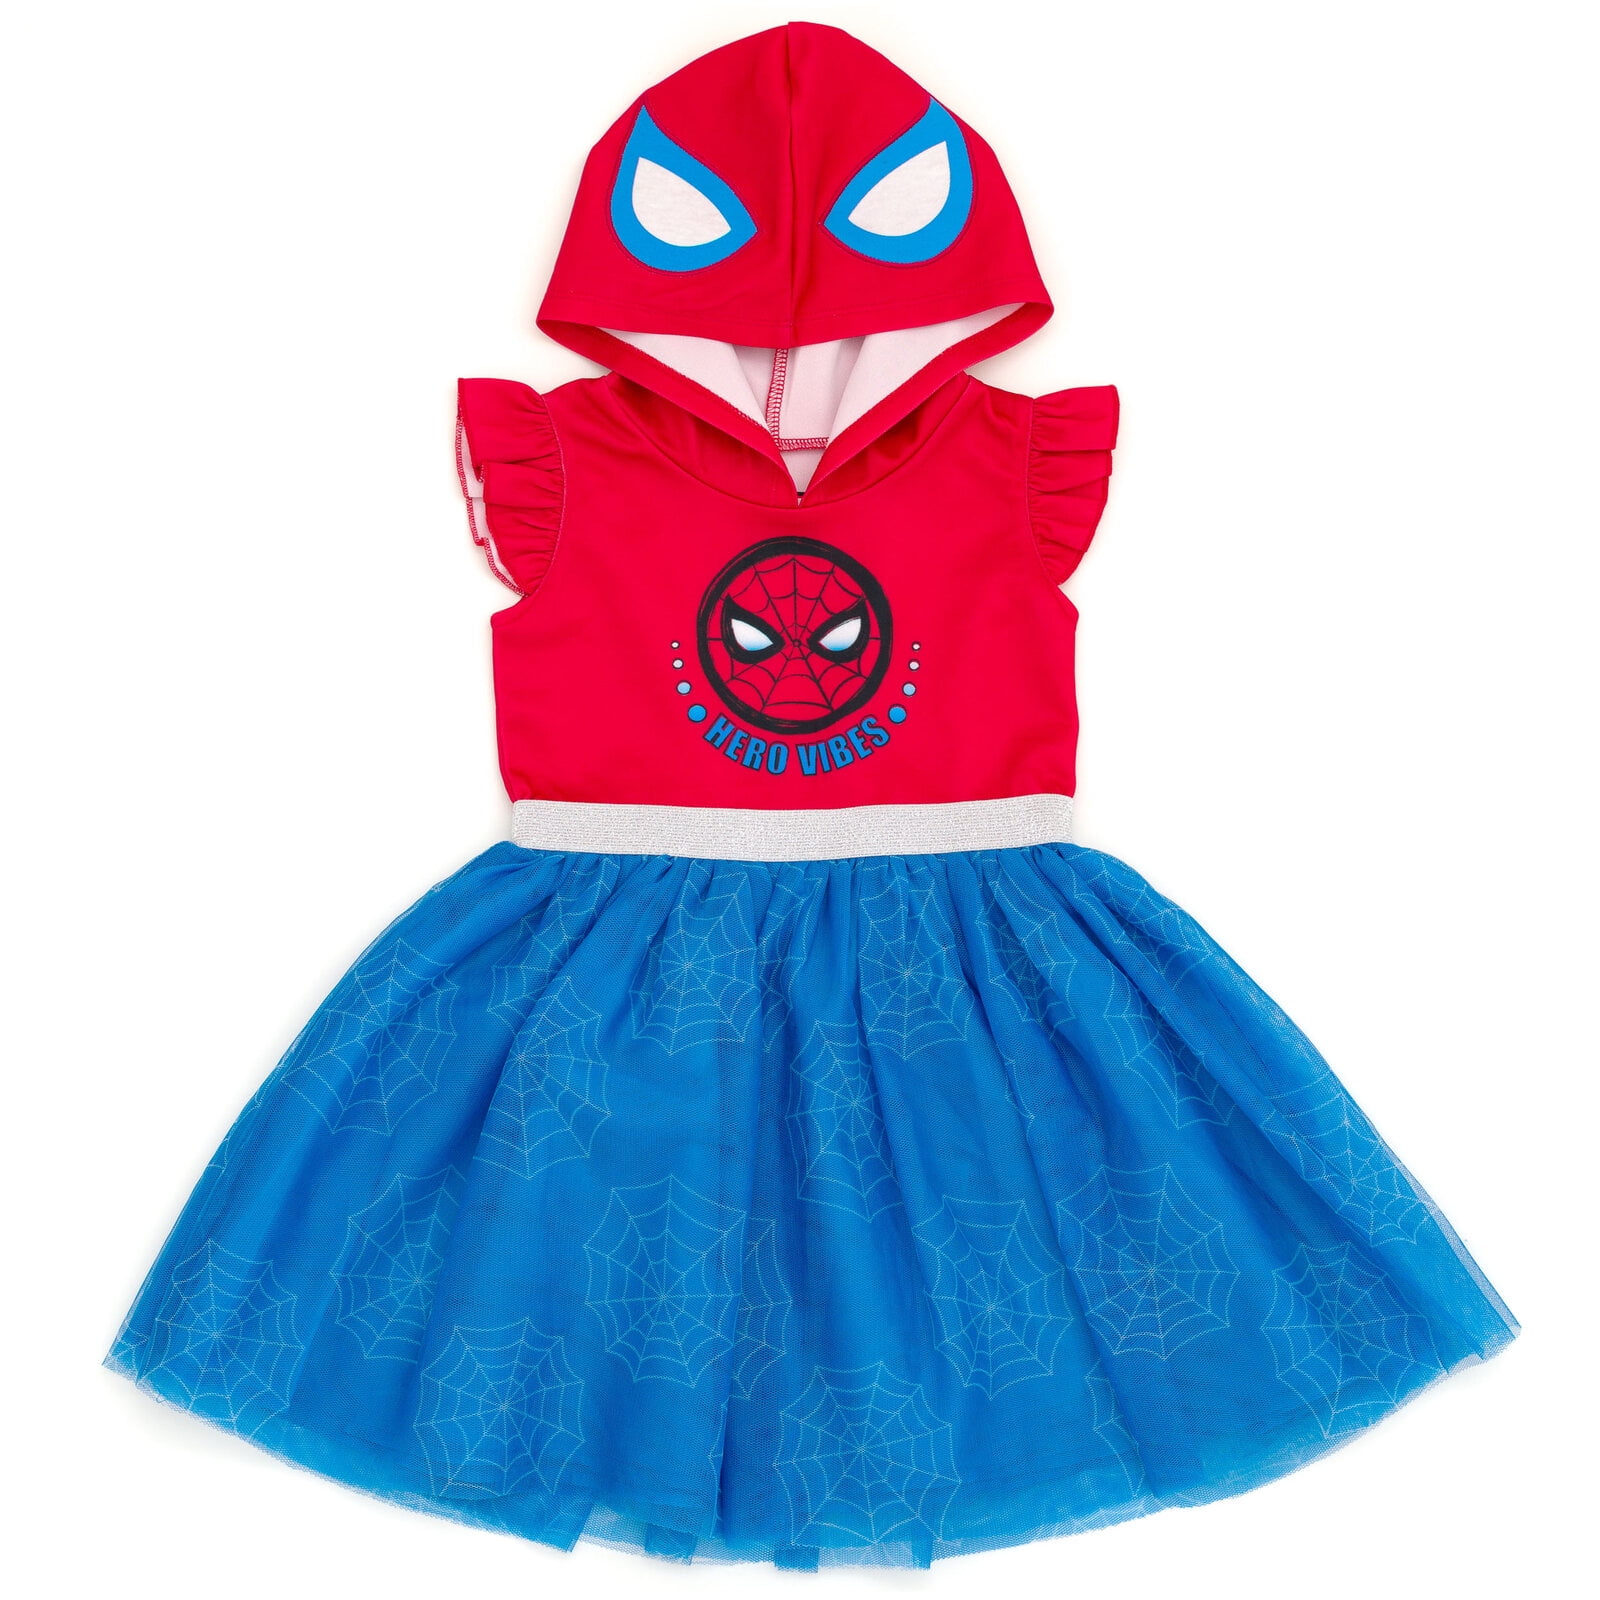 Buy Fancyku® Spiderman Costume Suit for Girls, Spider-man Dress with Mask  Set, Superhero Spider-Girl Princess Fancy Dress for Kids 3-4 Years Old  Cosplay Party Online at Low Prices in India - Amazon.in